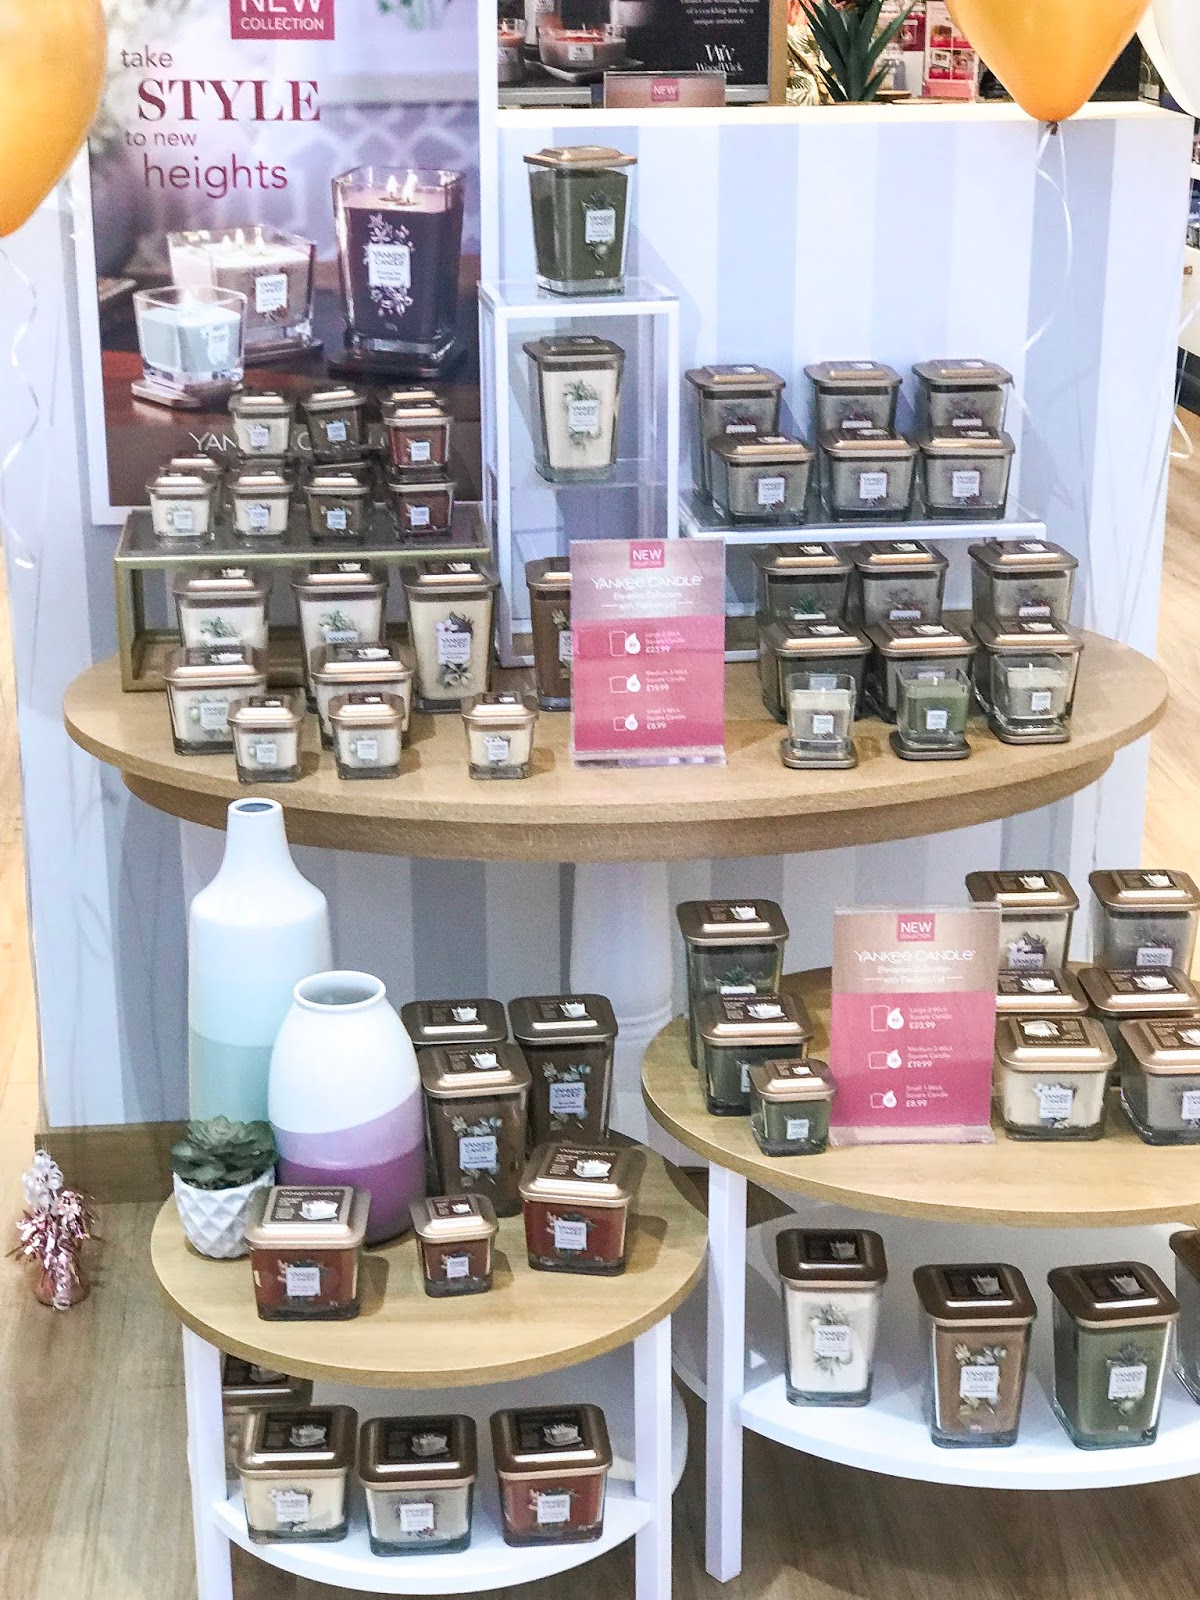 Yankee Candle Elevation Collection & Charming Scents Launch, UK Blogger, Beauty Blogger, Candle Blogger, Fragrance Blogger, Fragrance Review